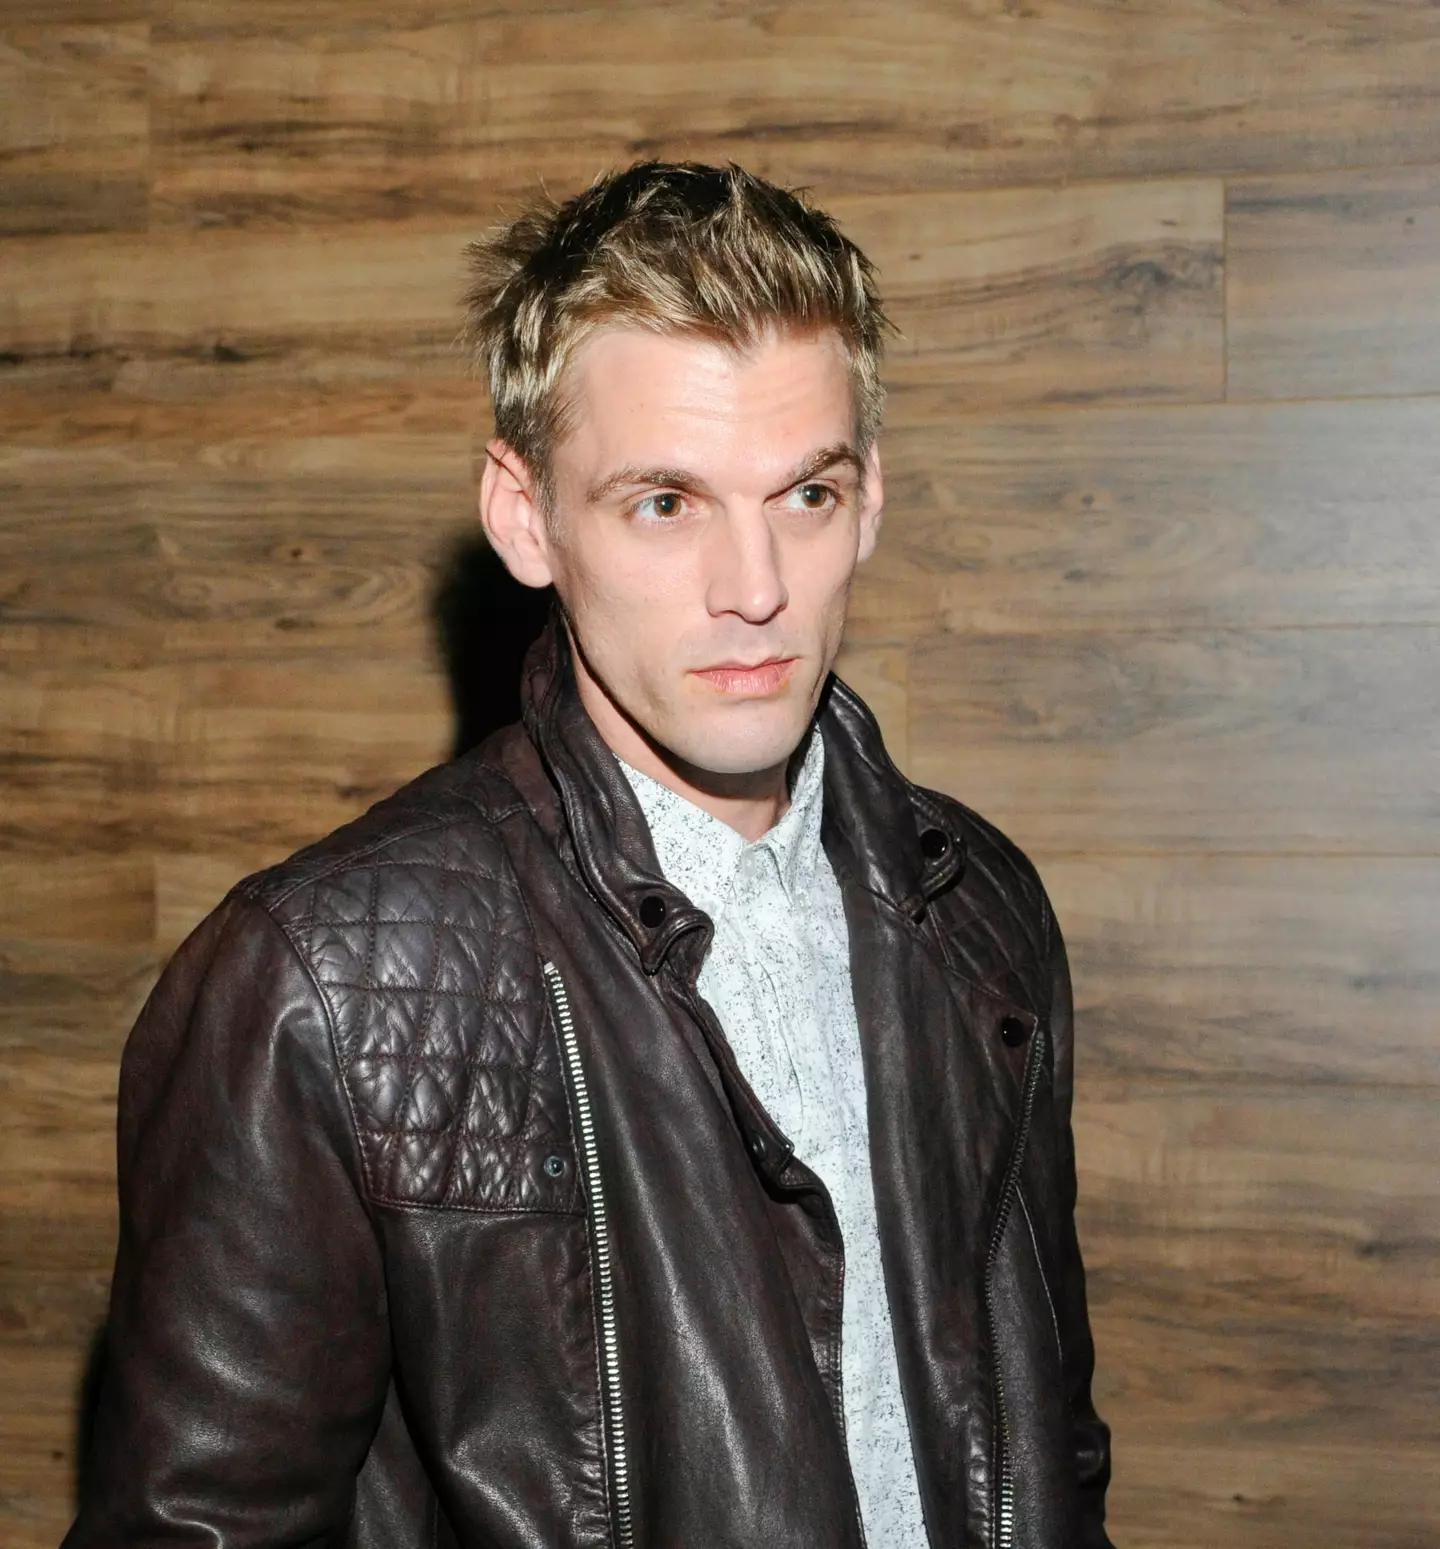 Aaron Carter tragically passed away at the age of 34.